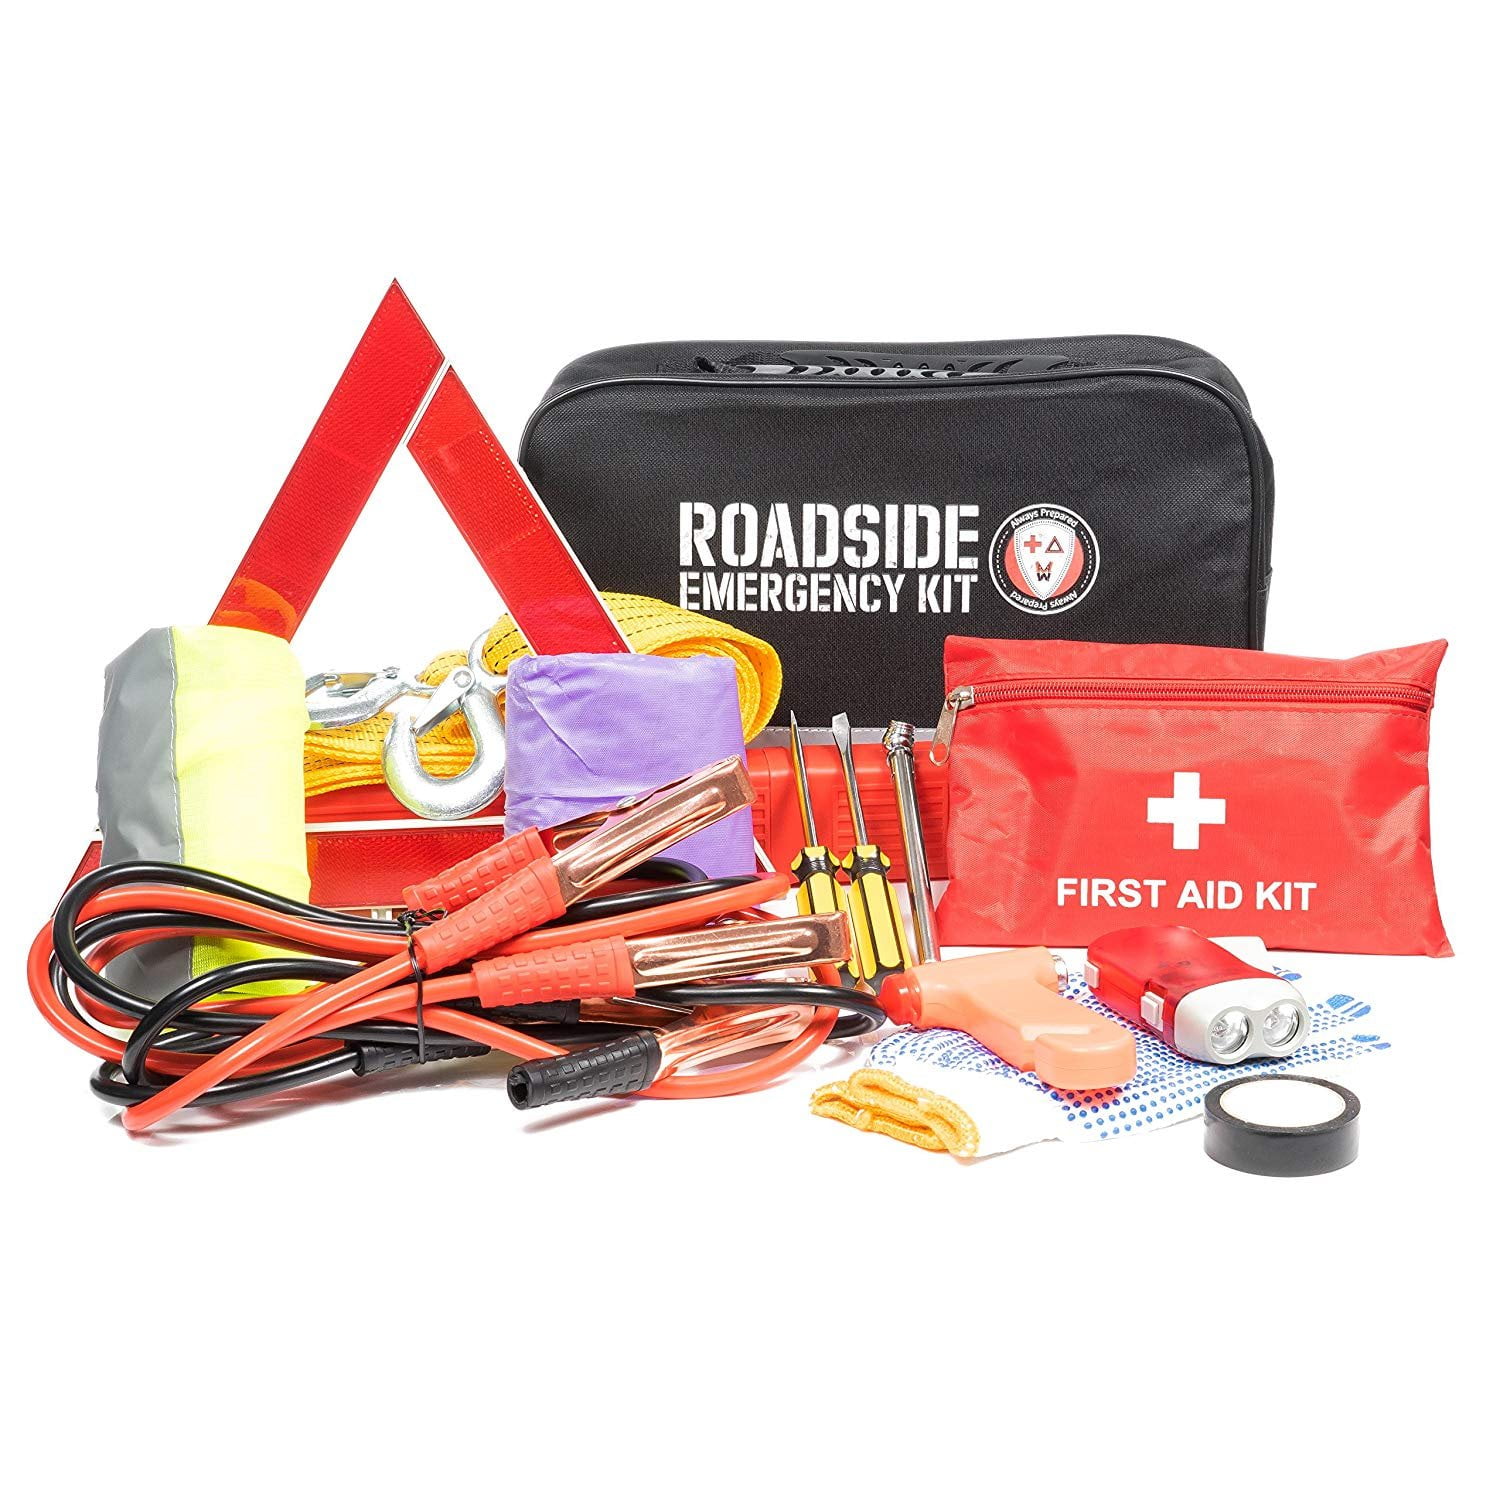 Roadside Assistance Car Emergency Kit - First Aid Kit, Jumper Cables, Tow  Rope, LED Flash Light, Rain Coat, Tire Pressure Gauge, Safety Vest & More  Ideal Winter Accessory For Your Car, Truck